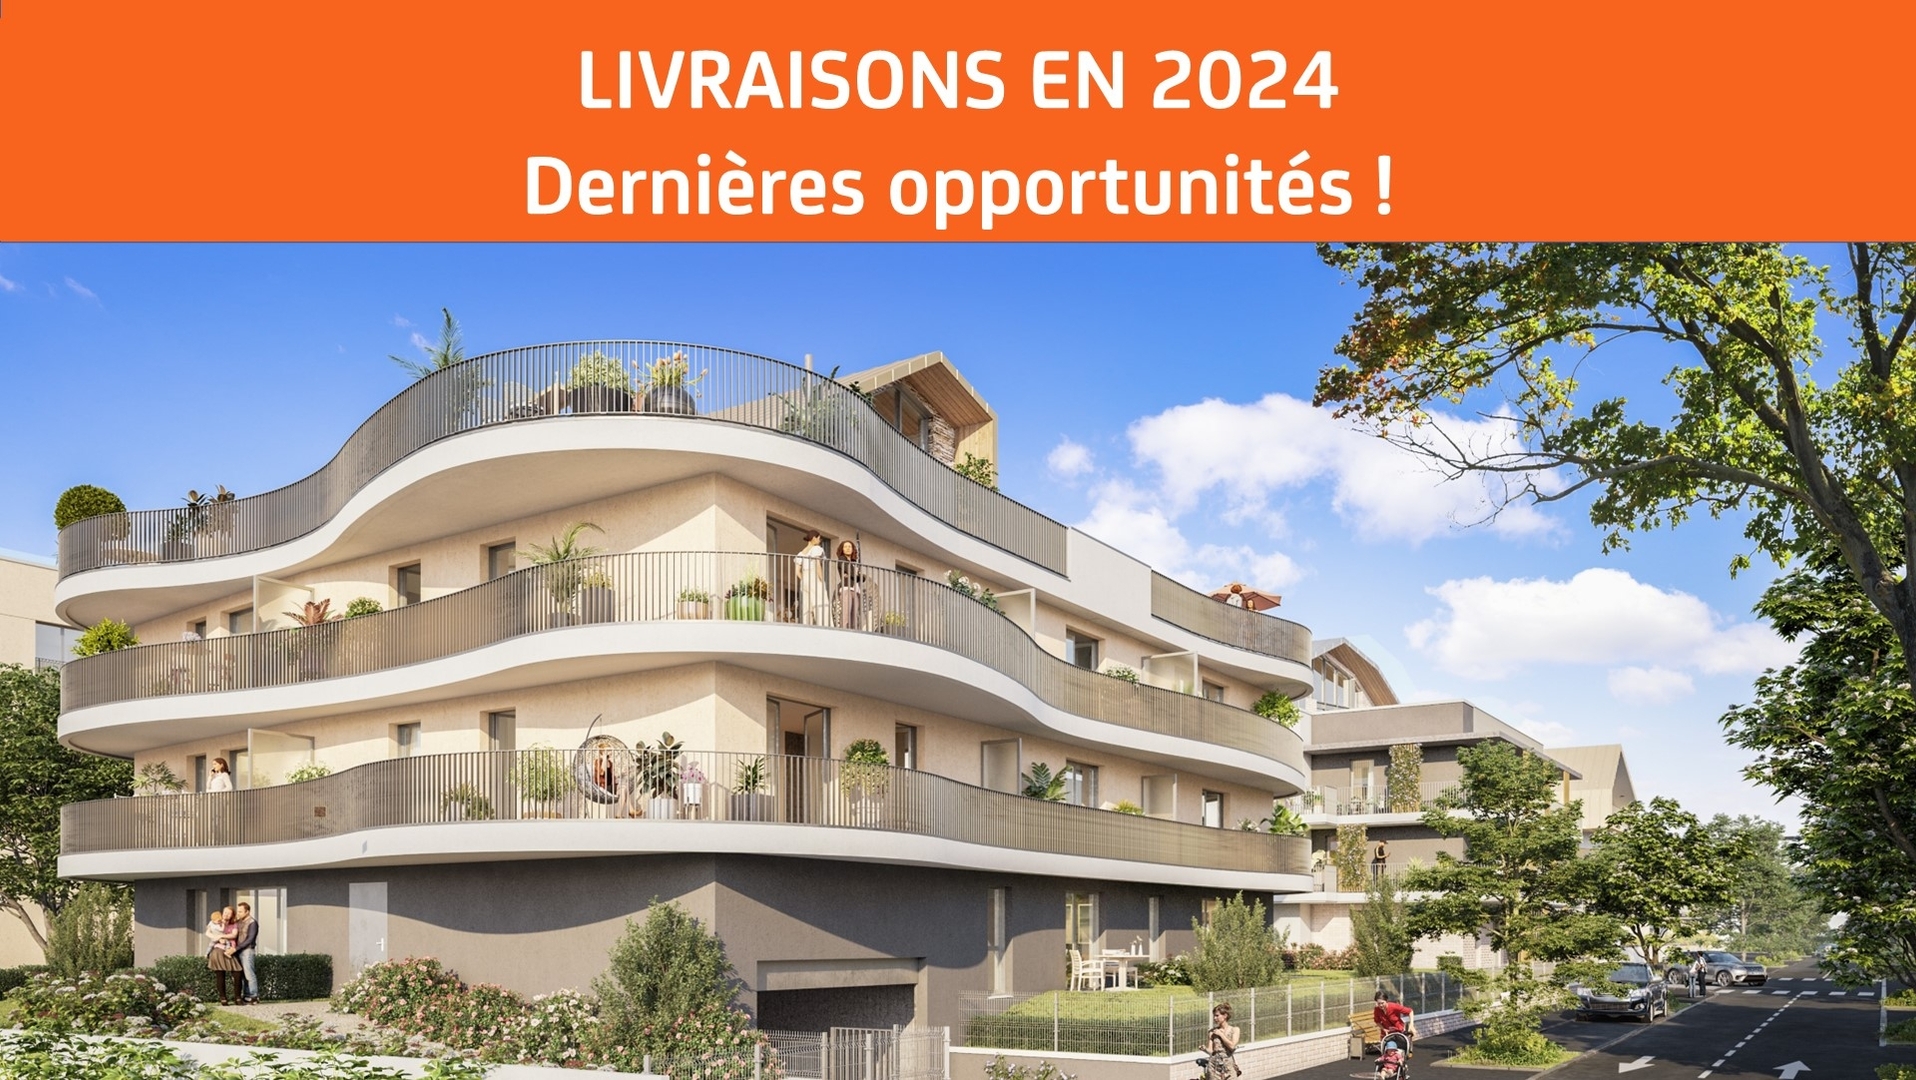 Programme immobilier neuf L'INSOLITE /ORLEANS METROPOLE